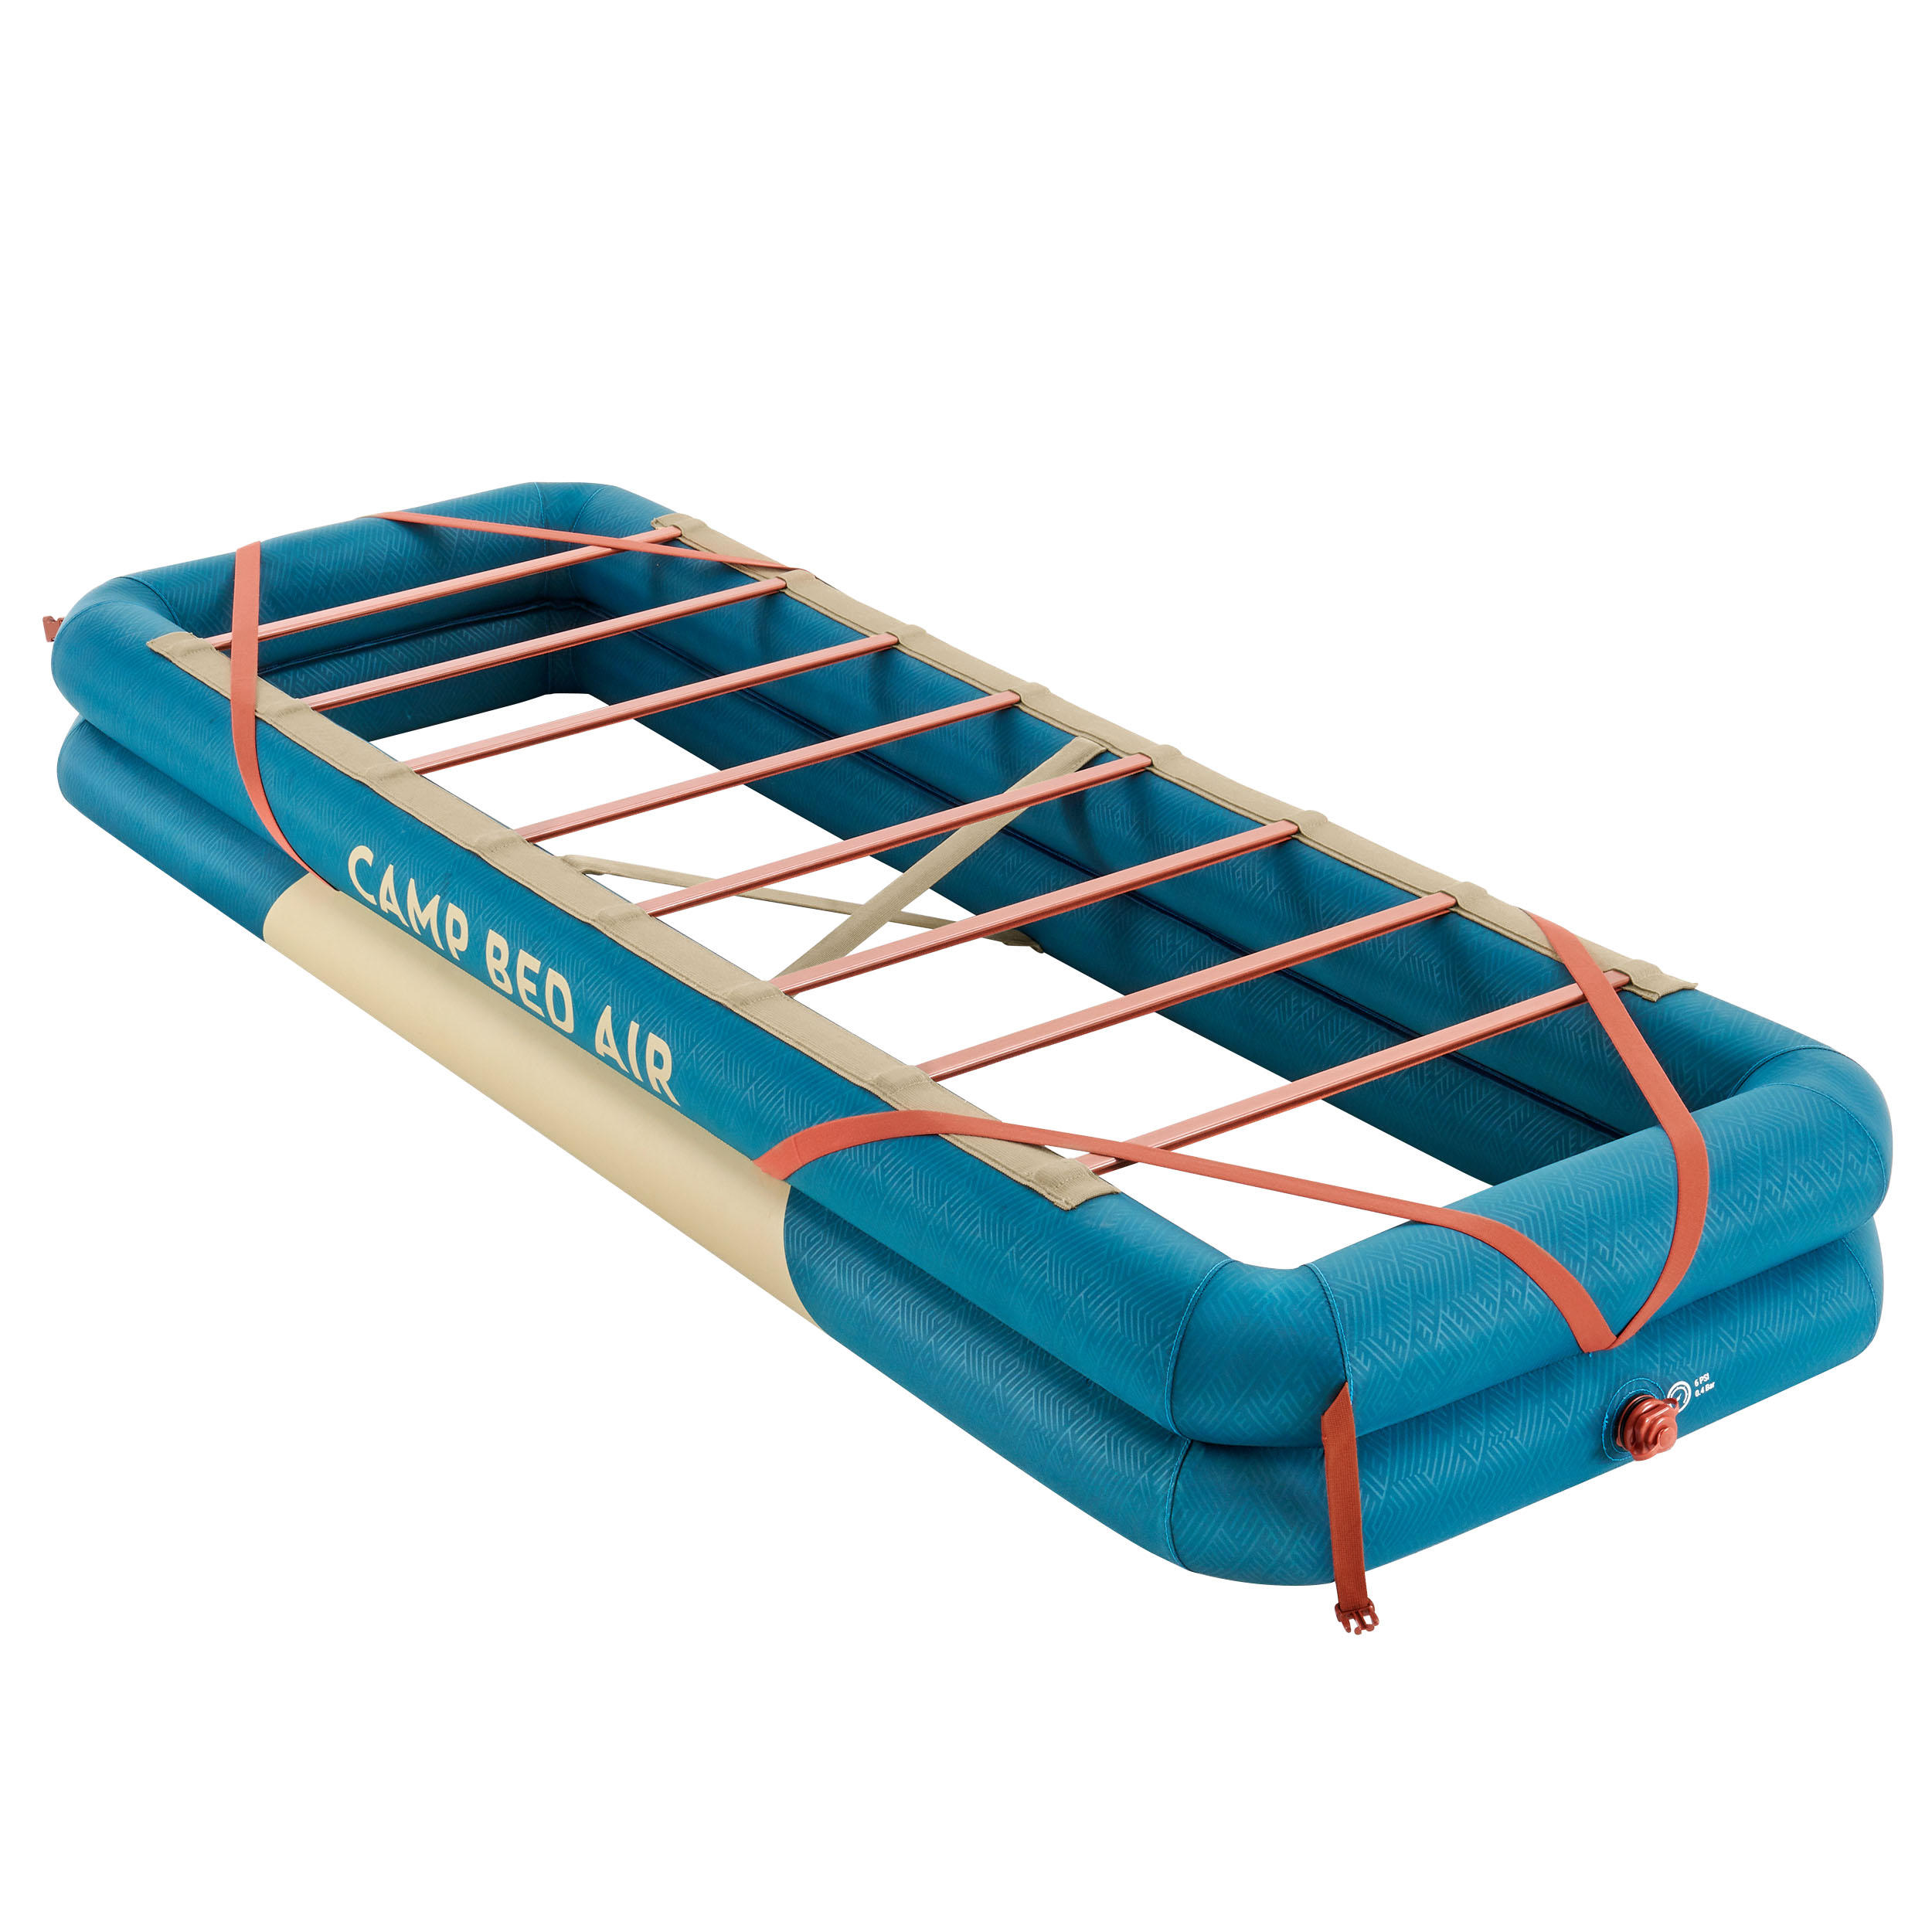 INFLATABLE CAMPING BED BASE - CAMP BED 